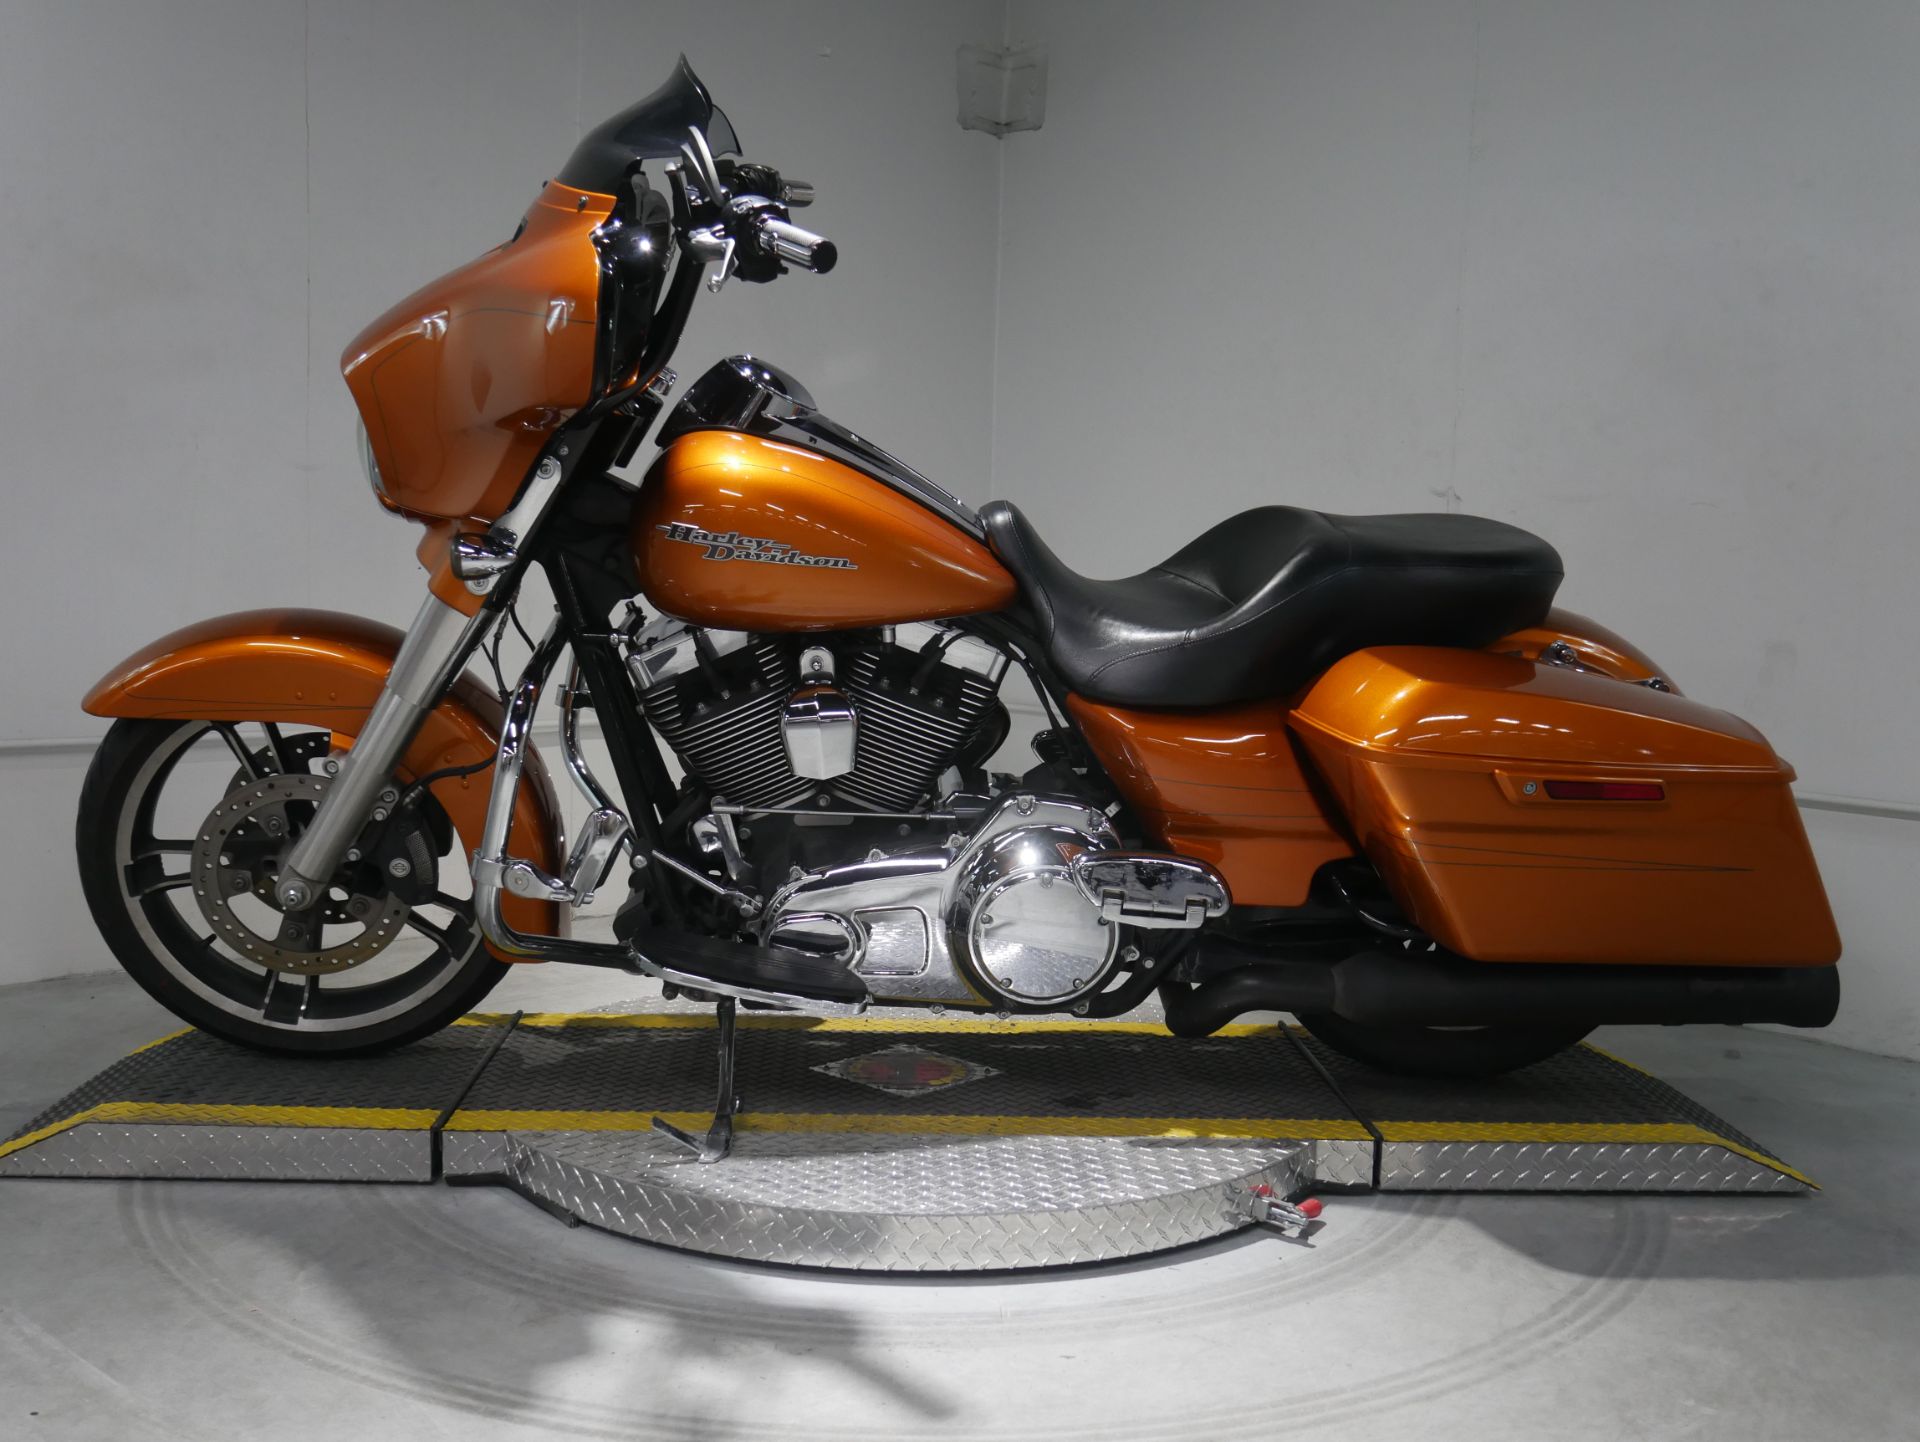 Used 2015 Harley Davidson Street Glide Special Amber Whiskey Motorcycles In Dubuque Ia 676092